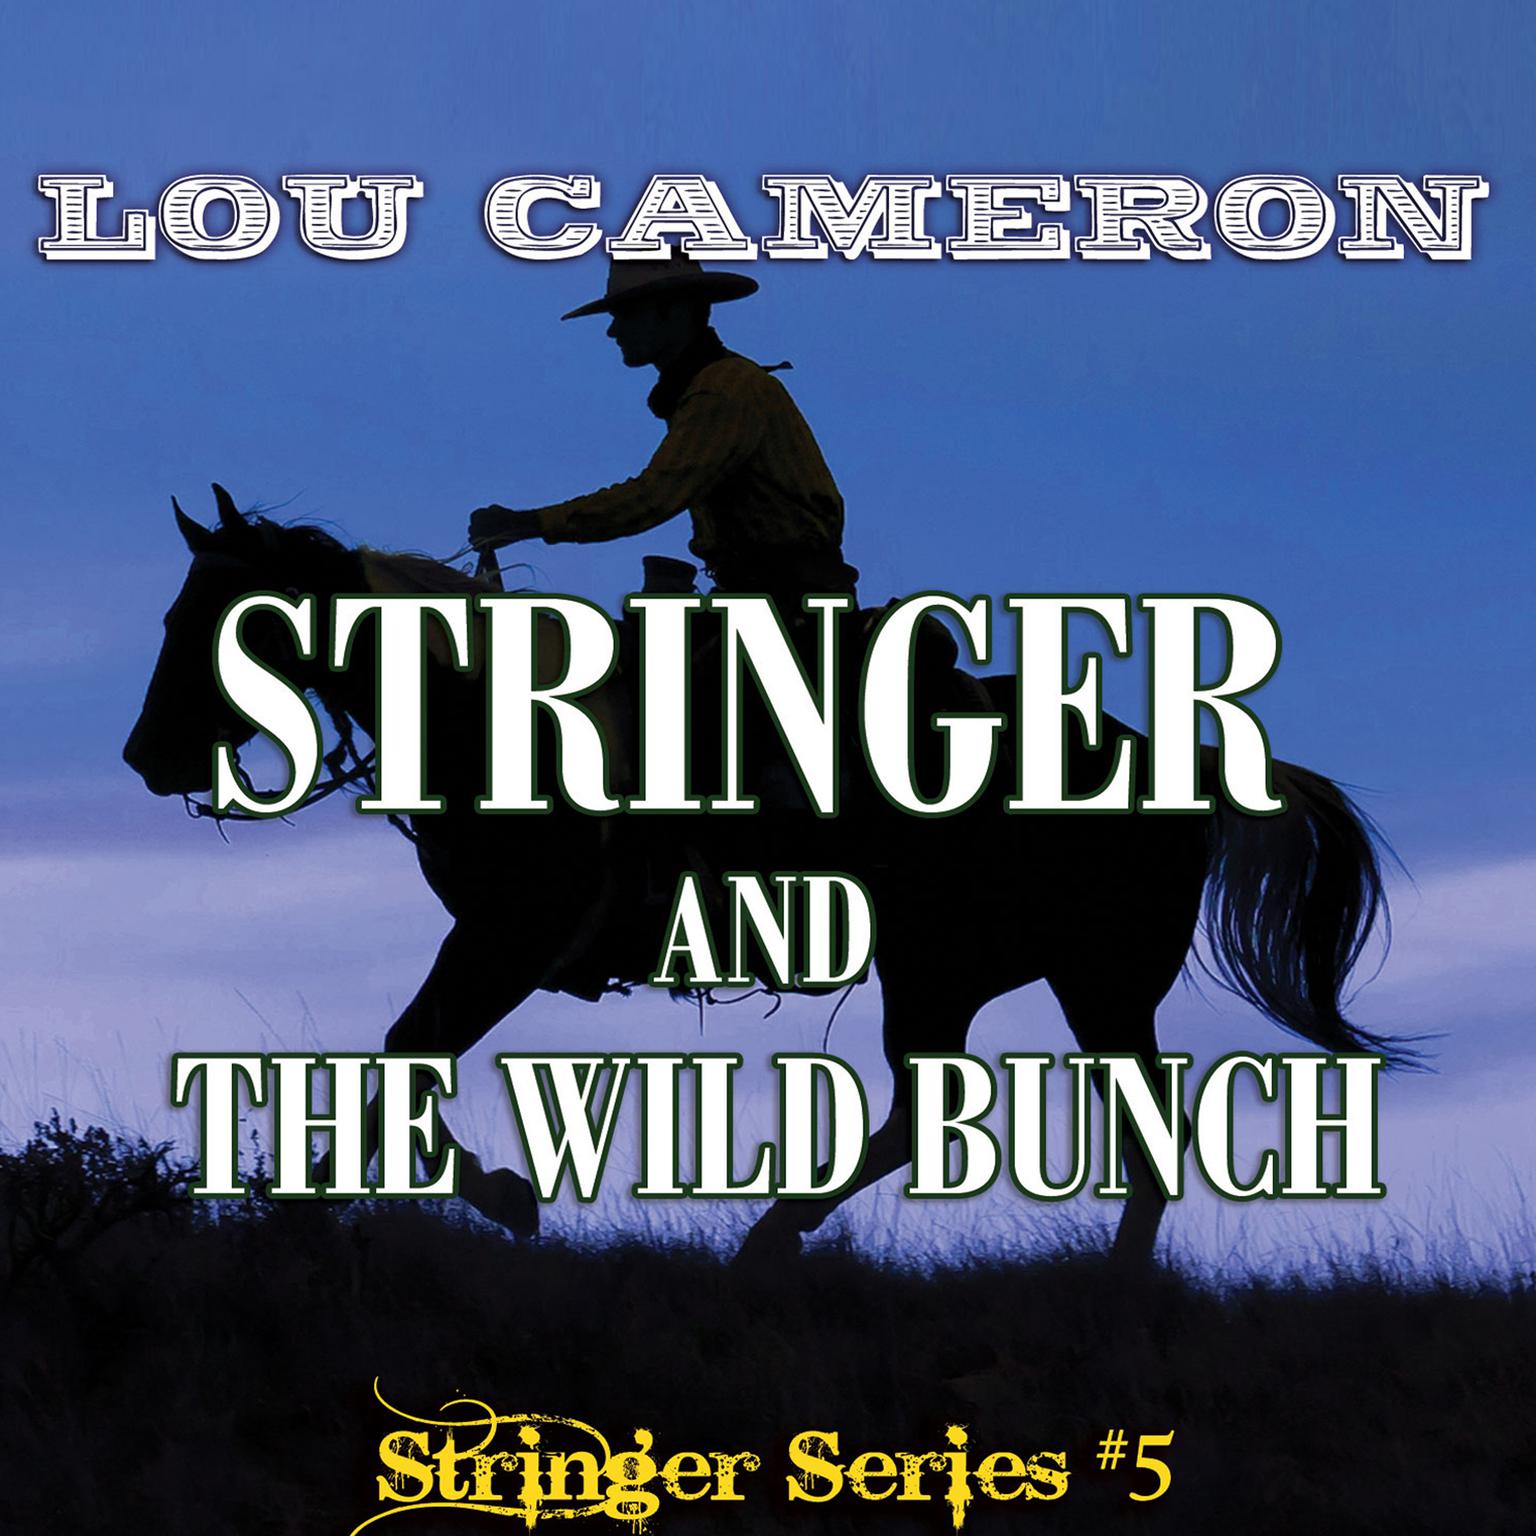 Stringer and the Wild Bunch Audiobook, by Lou Cameron